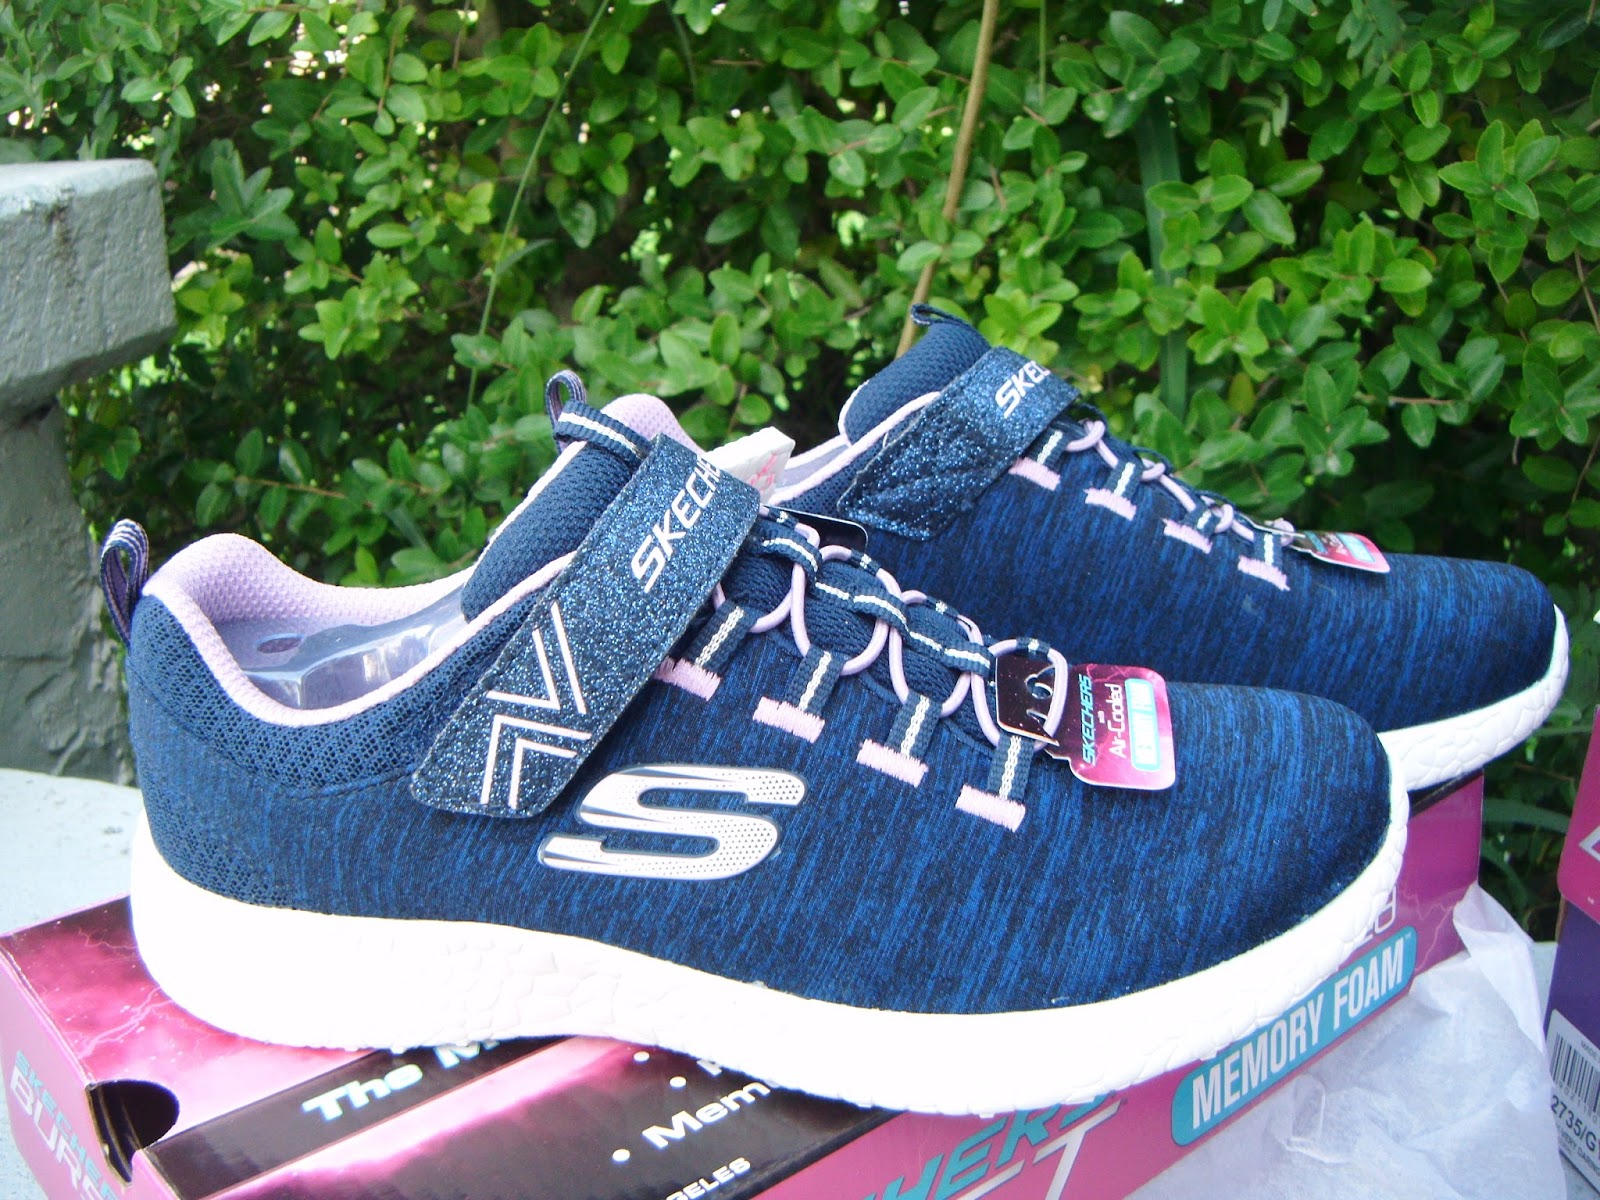 The Diaries: SKECHERS Burst + Twinkle Toes Lights Up New York + Giveaway!